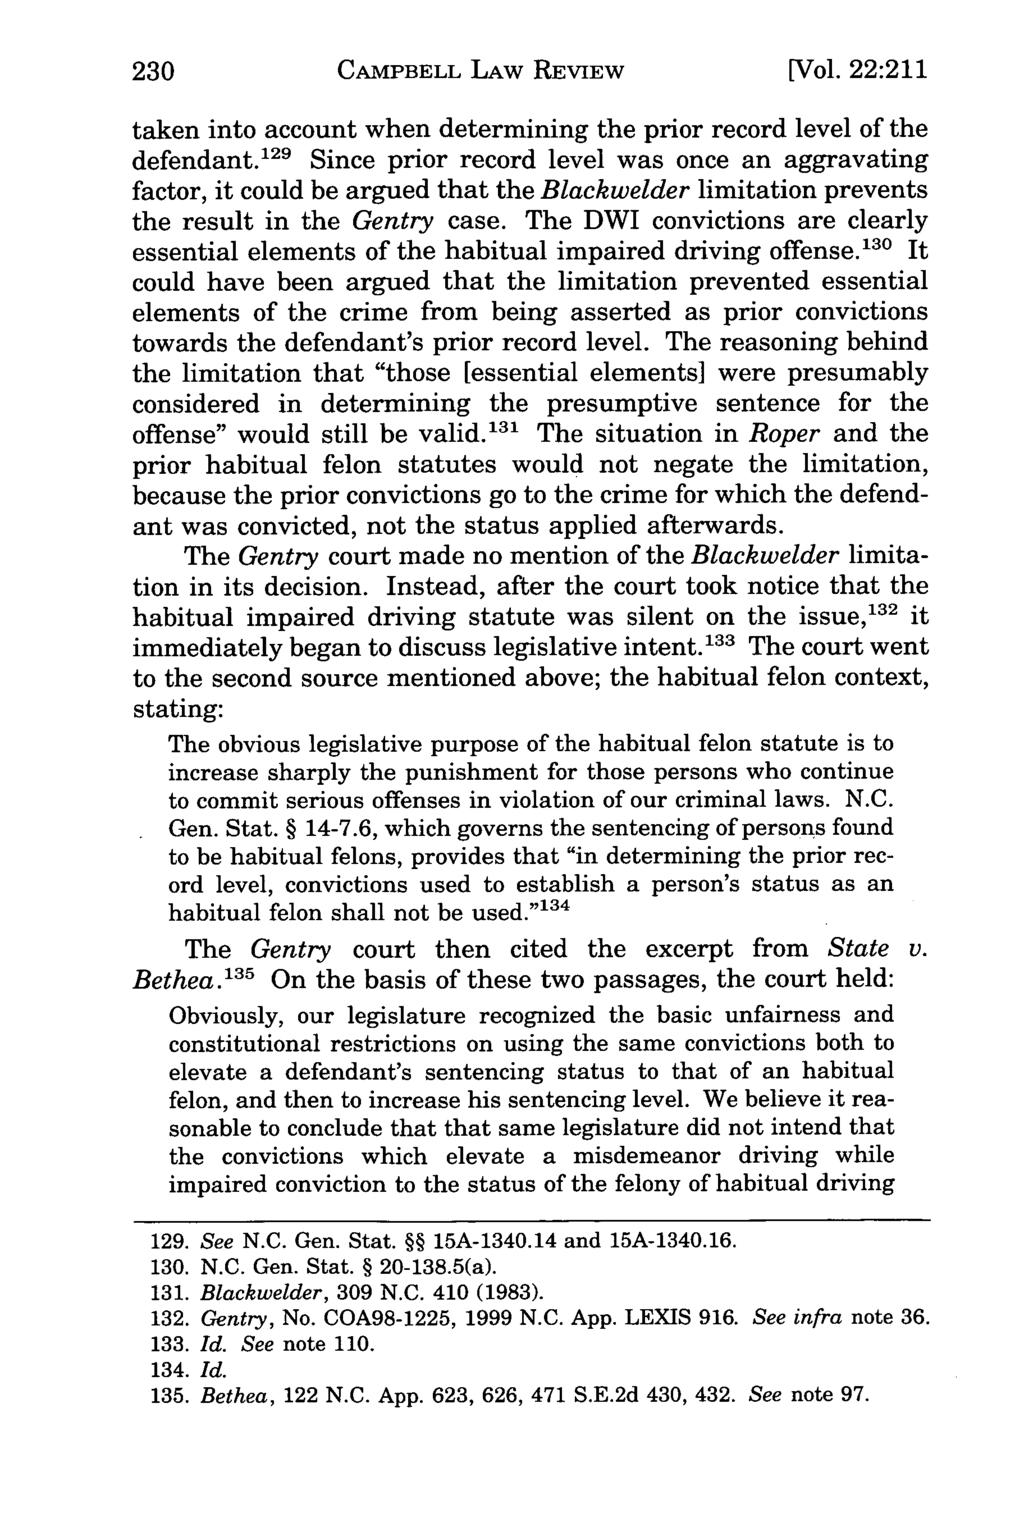 230 Campbell Law Review, Vol. 22, Iss. 1 [1999], Art. 7 CAMPBELL LAW REVIEW [Vol. 22:211 taken into account when determining the prior record level of the defendant.